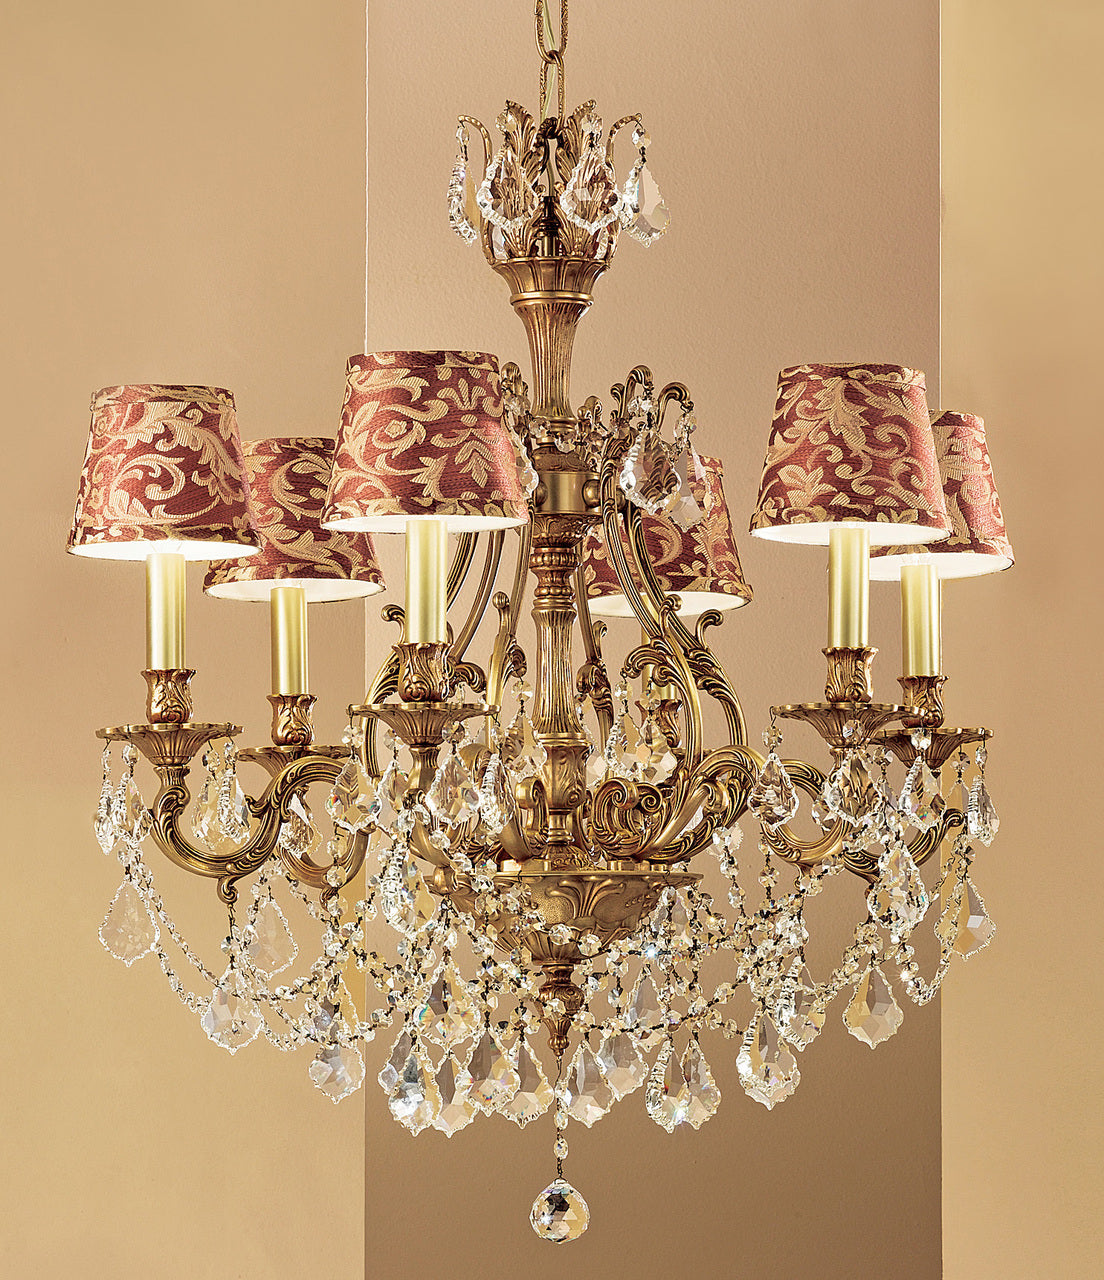 Classic Lighting 57356 FG SC Majestic Imperial Crystal Chandelier in French Gold (Imported from Spain)